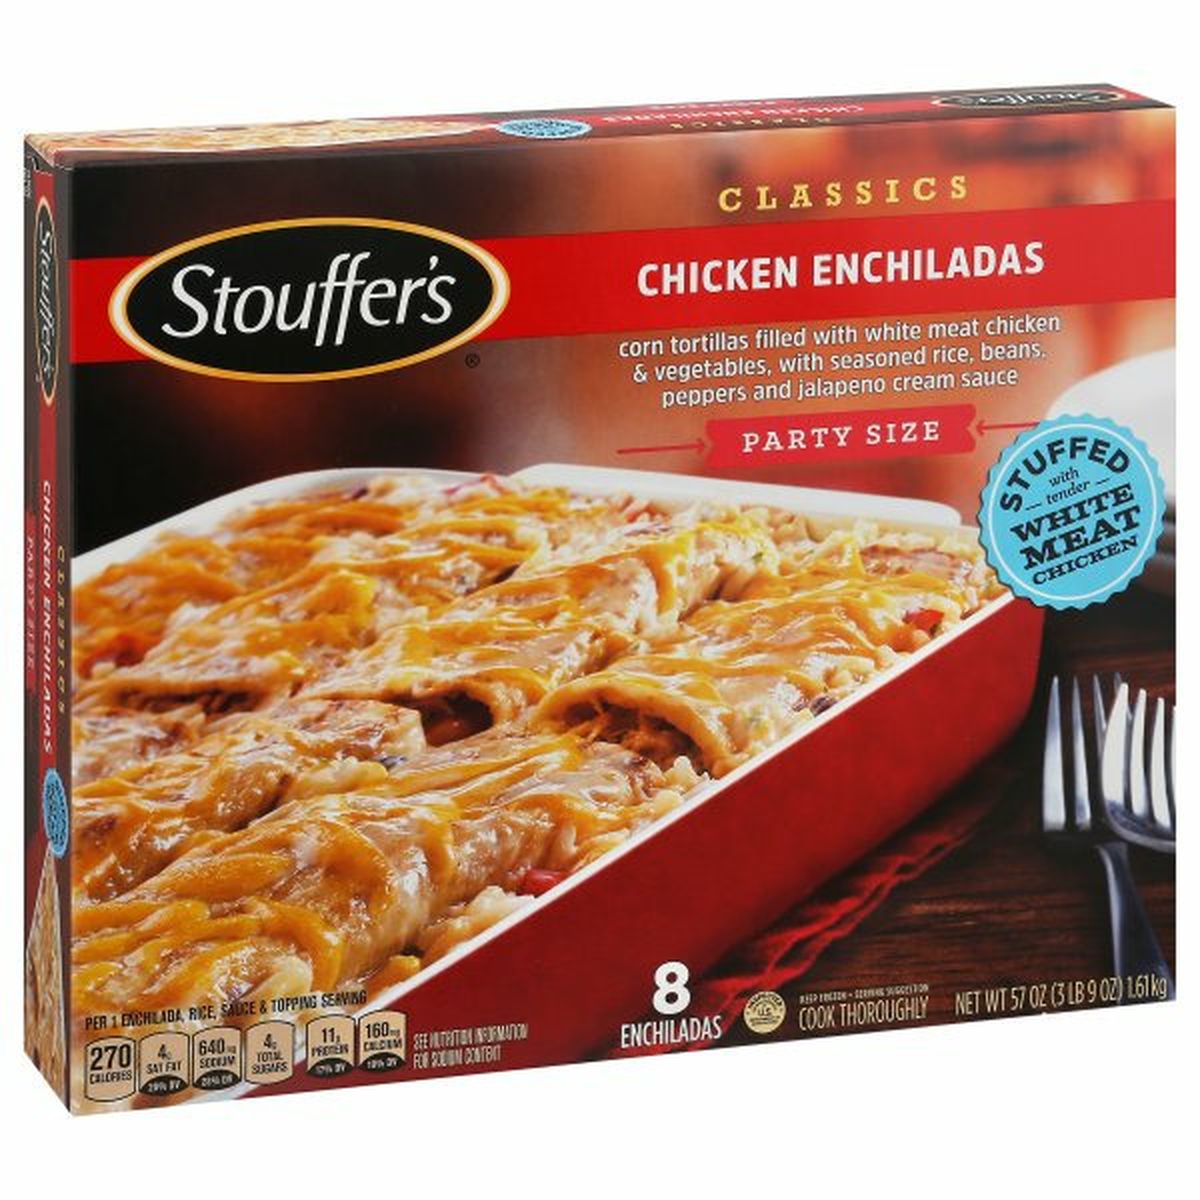 Calories in Stouffer's Chicken Enchiladas, Classic, Party Size